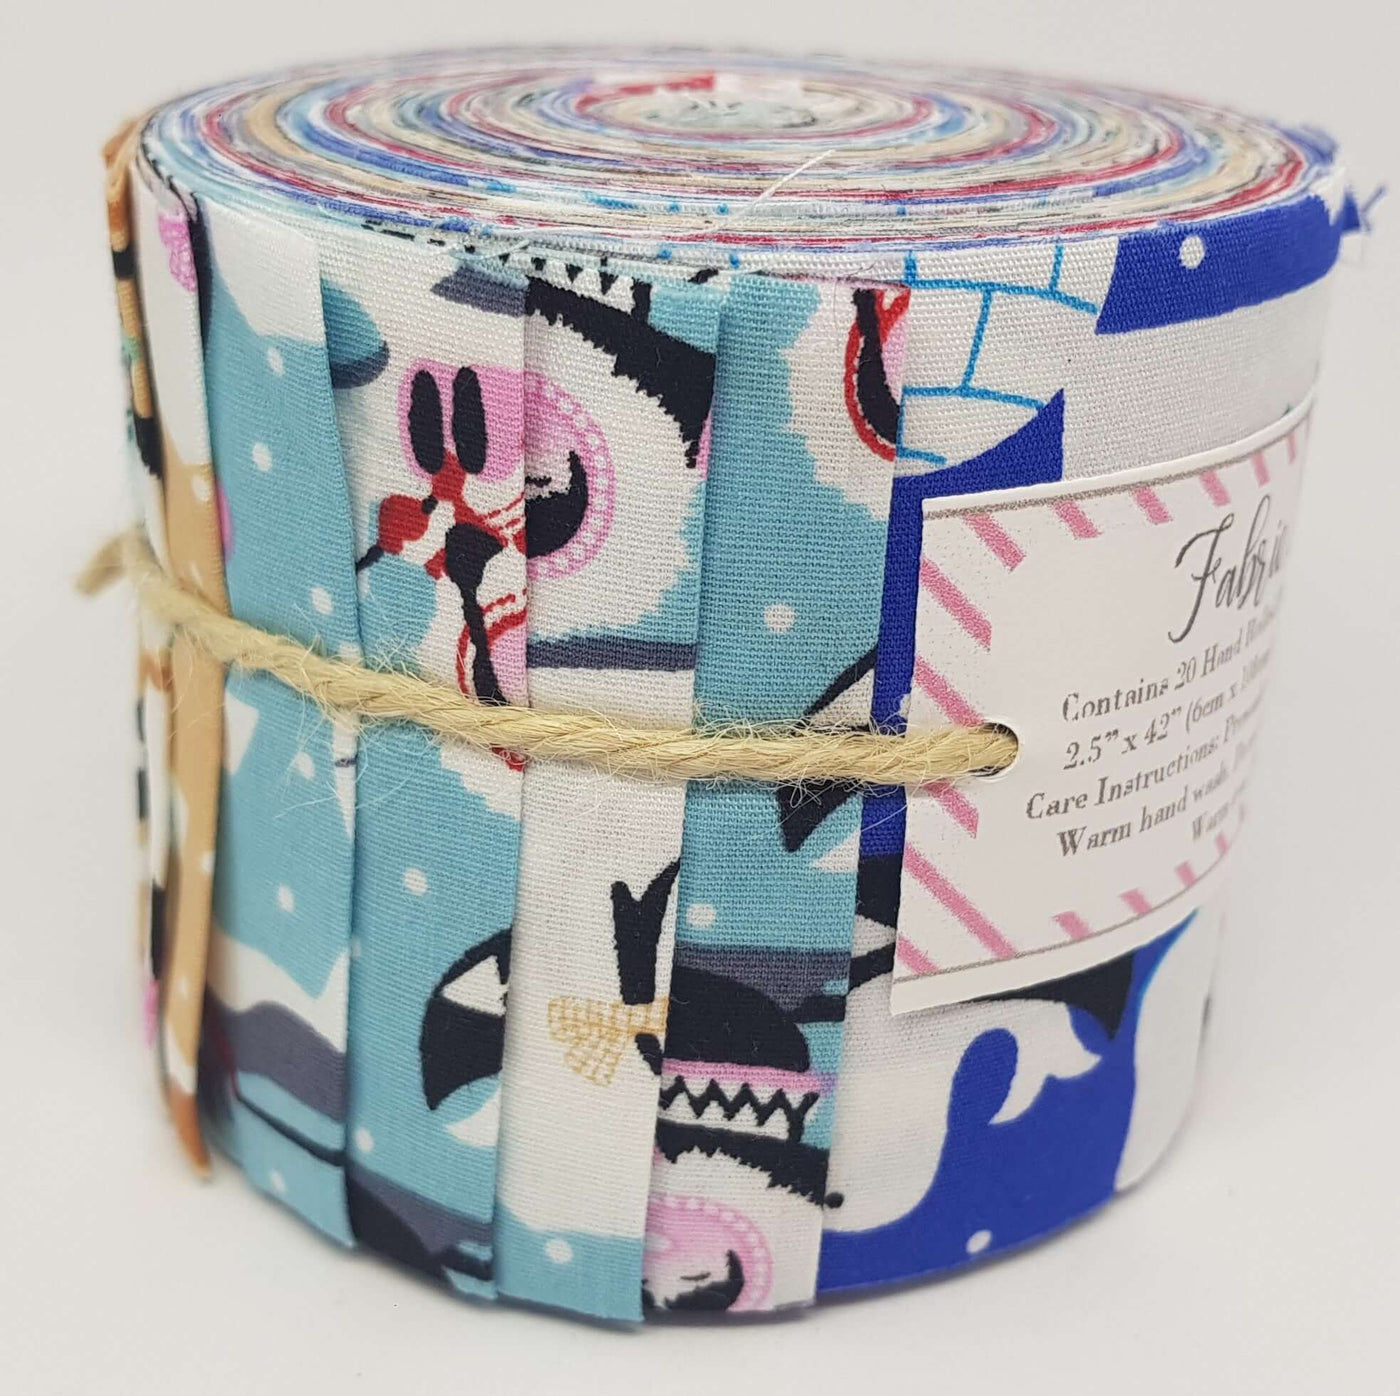 Arctic Fabric Roll /Jelly Roll. 20 piece fabric roll 2.5 x 42". Quilting, crafts. Sledge, ice, igloo patchwork fabric.